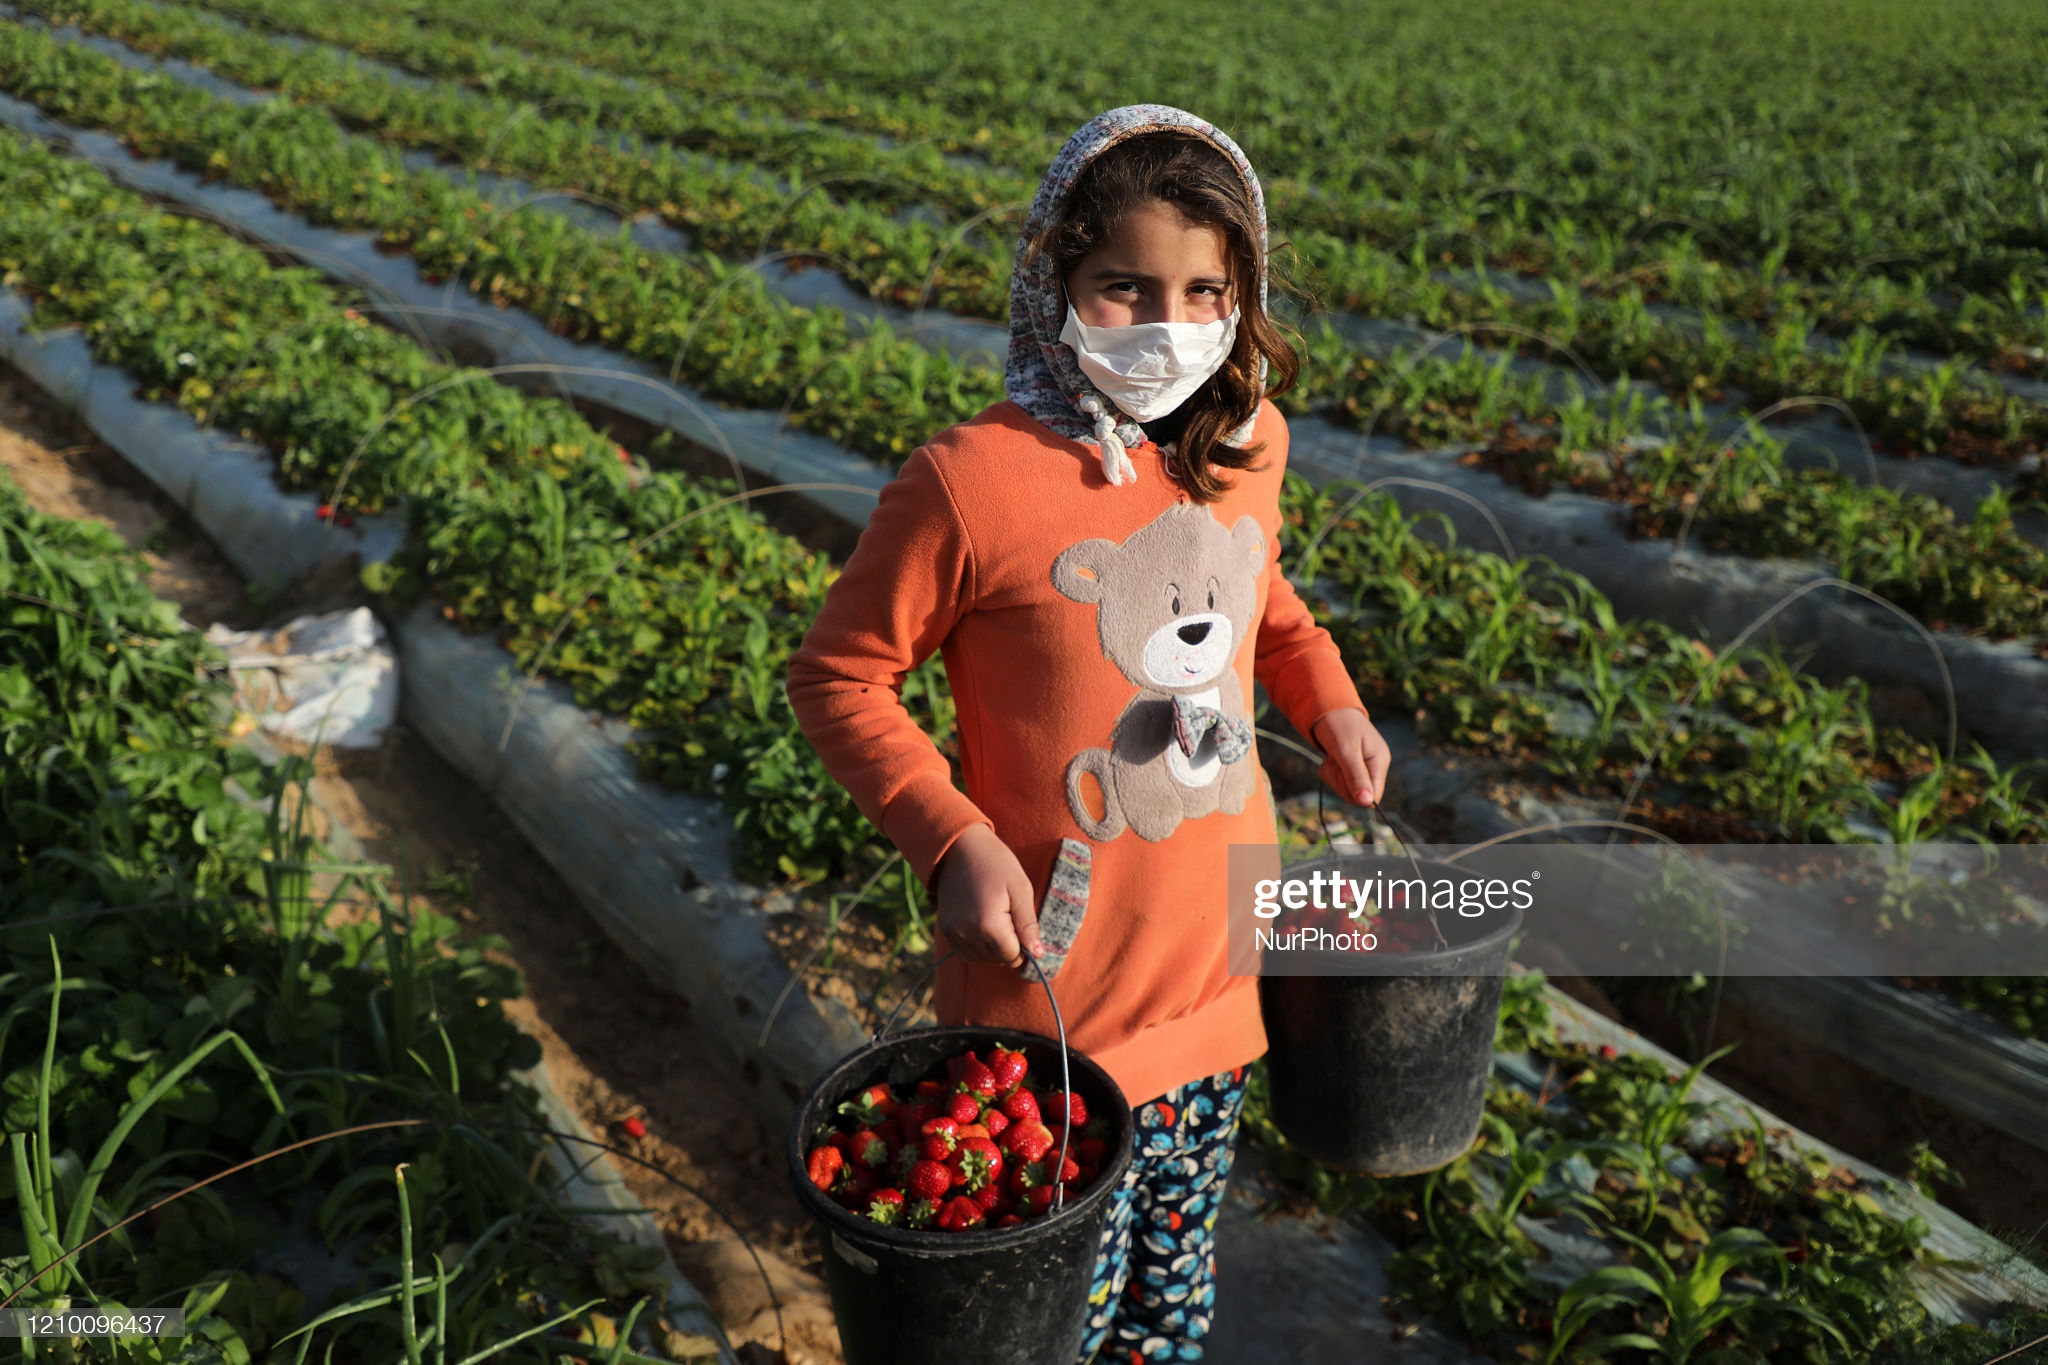 palestinian-girl-wearing-a-mask-holds-a-bucket-filled-with-at-a-in-picture-id1210096437